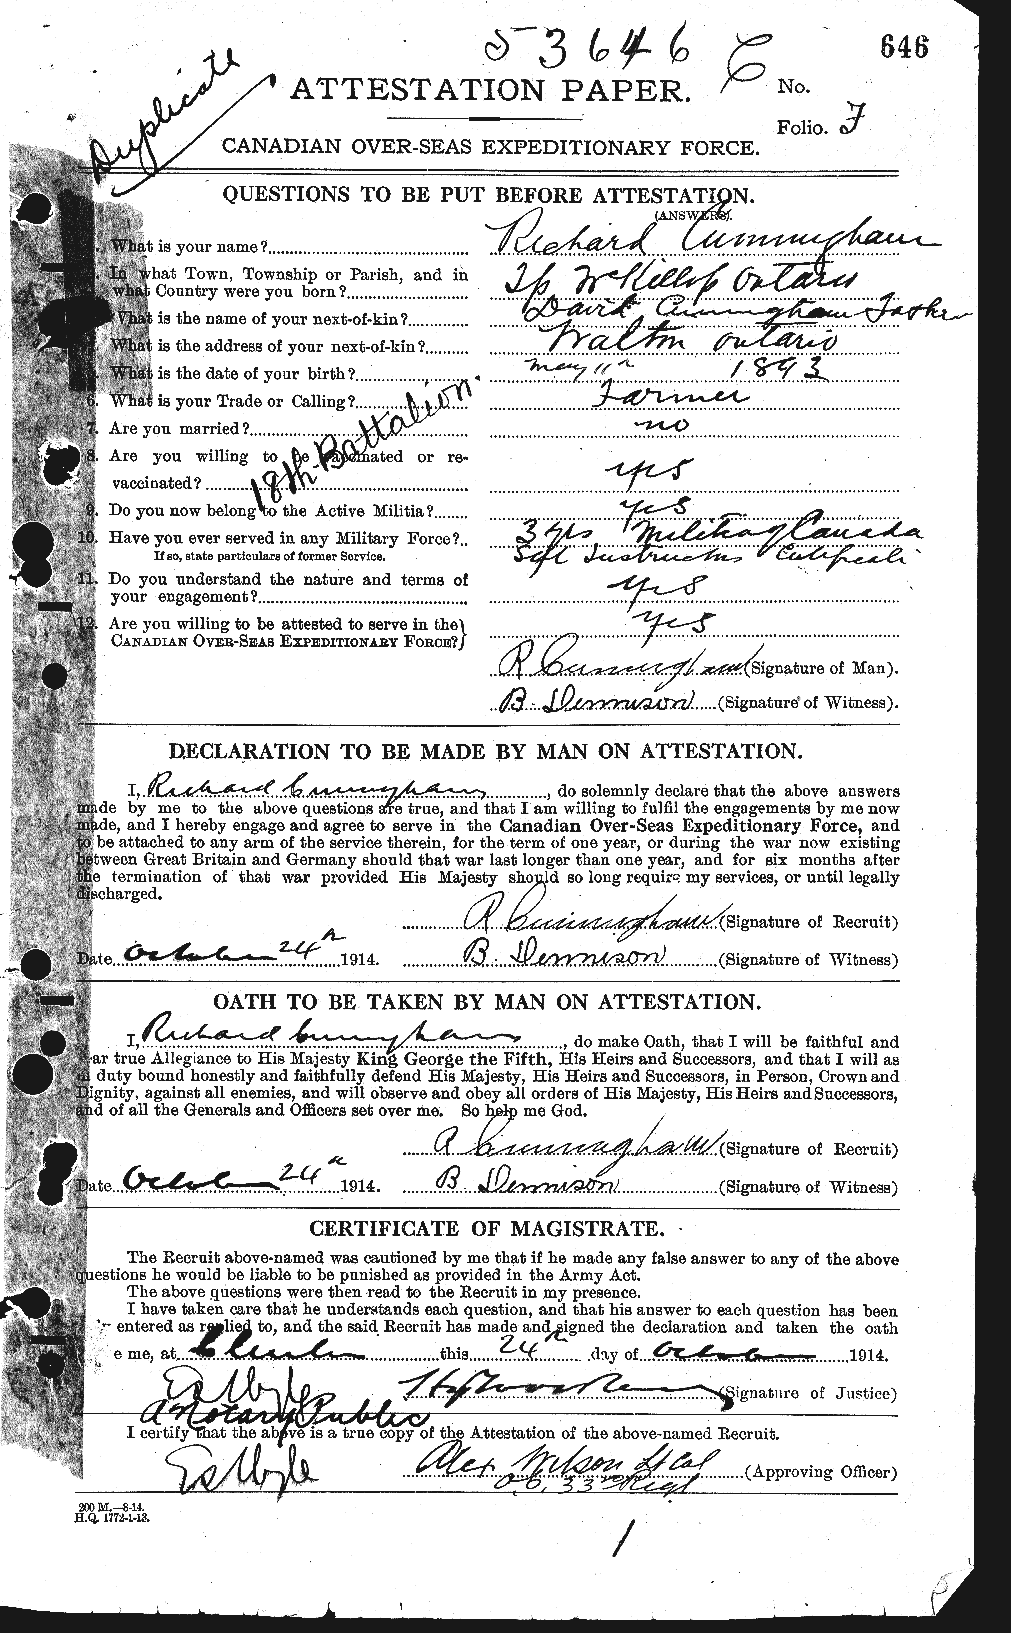 Personnel Records of the First World War - CEF 074507a